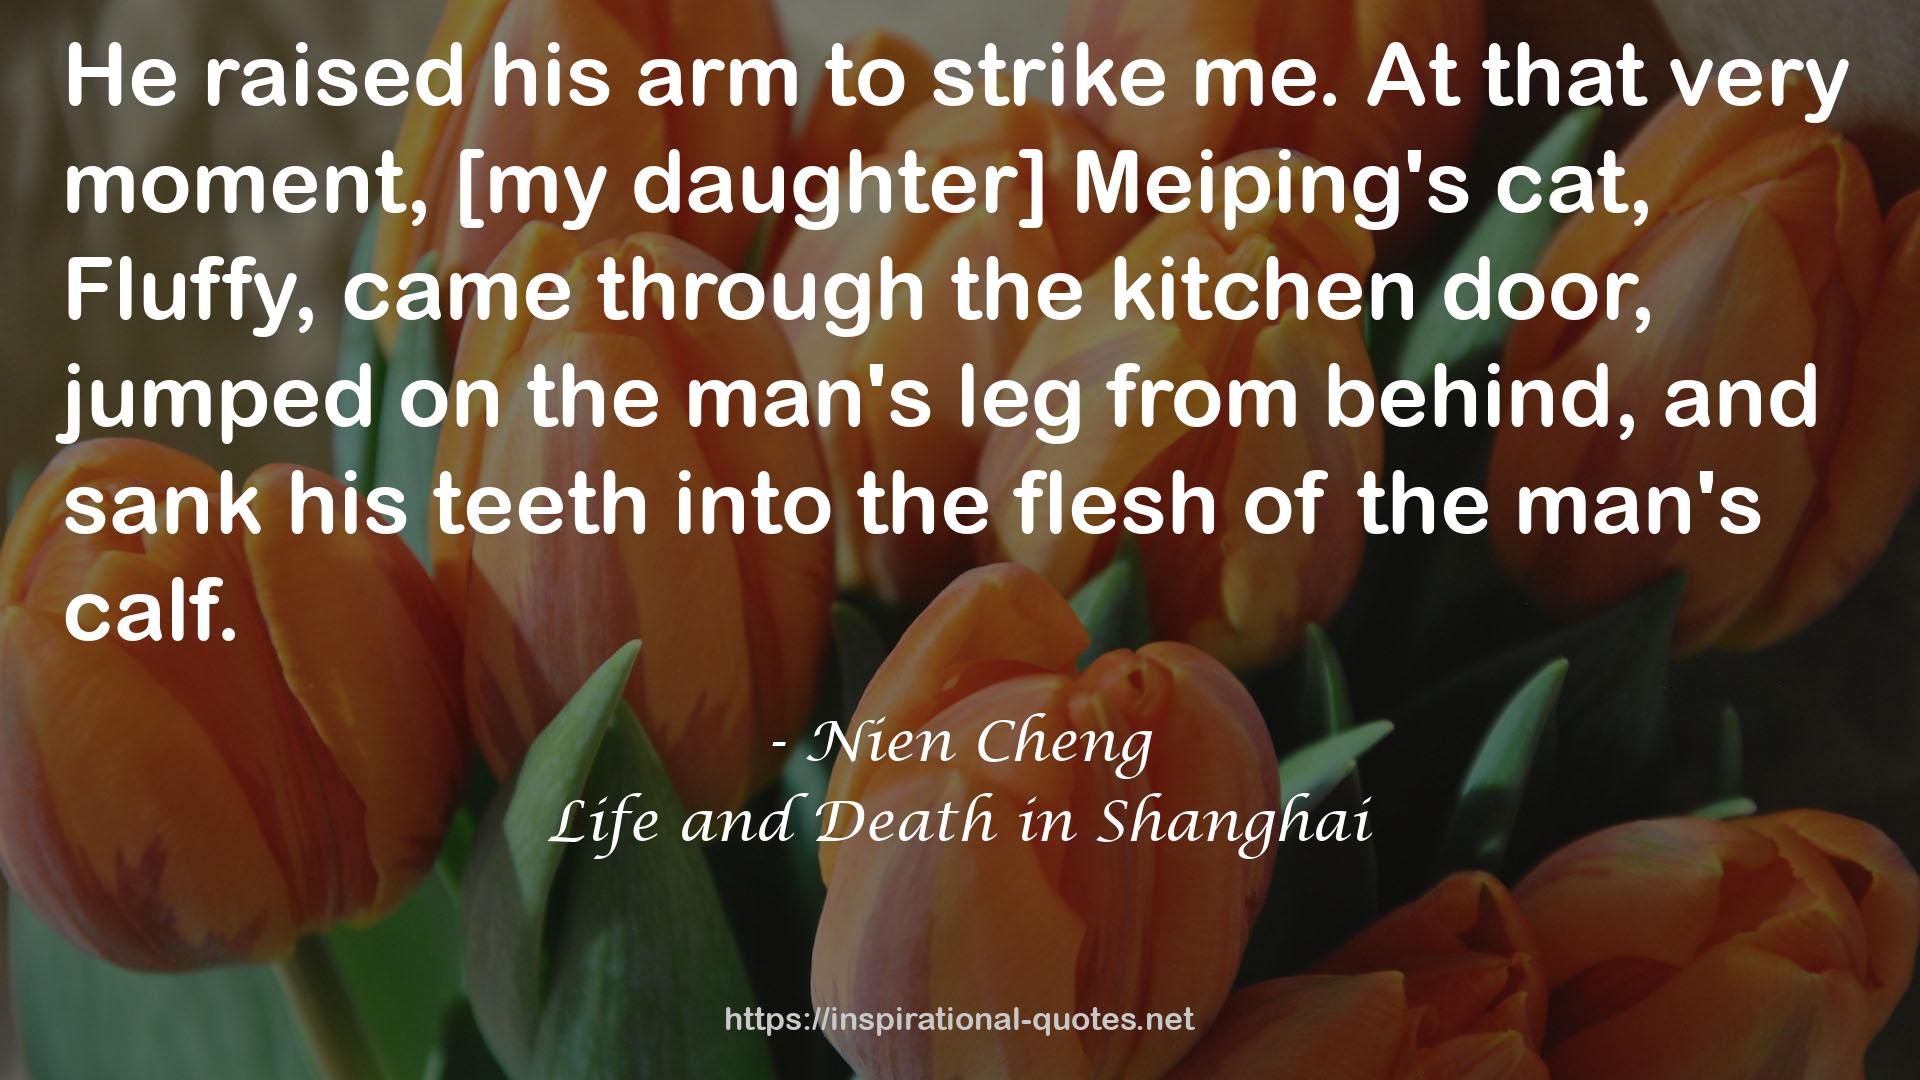 Life and Death in Shanghai QUOTES